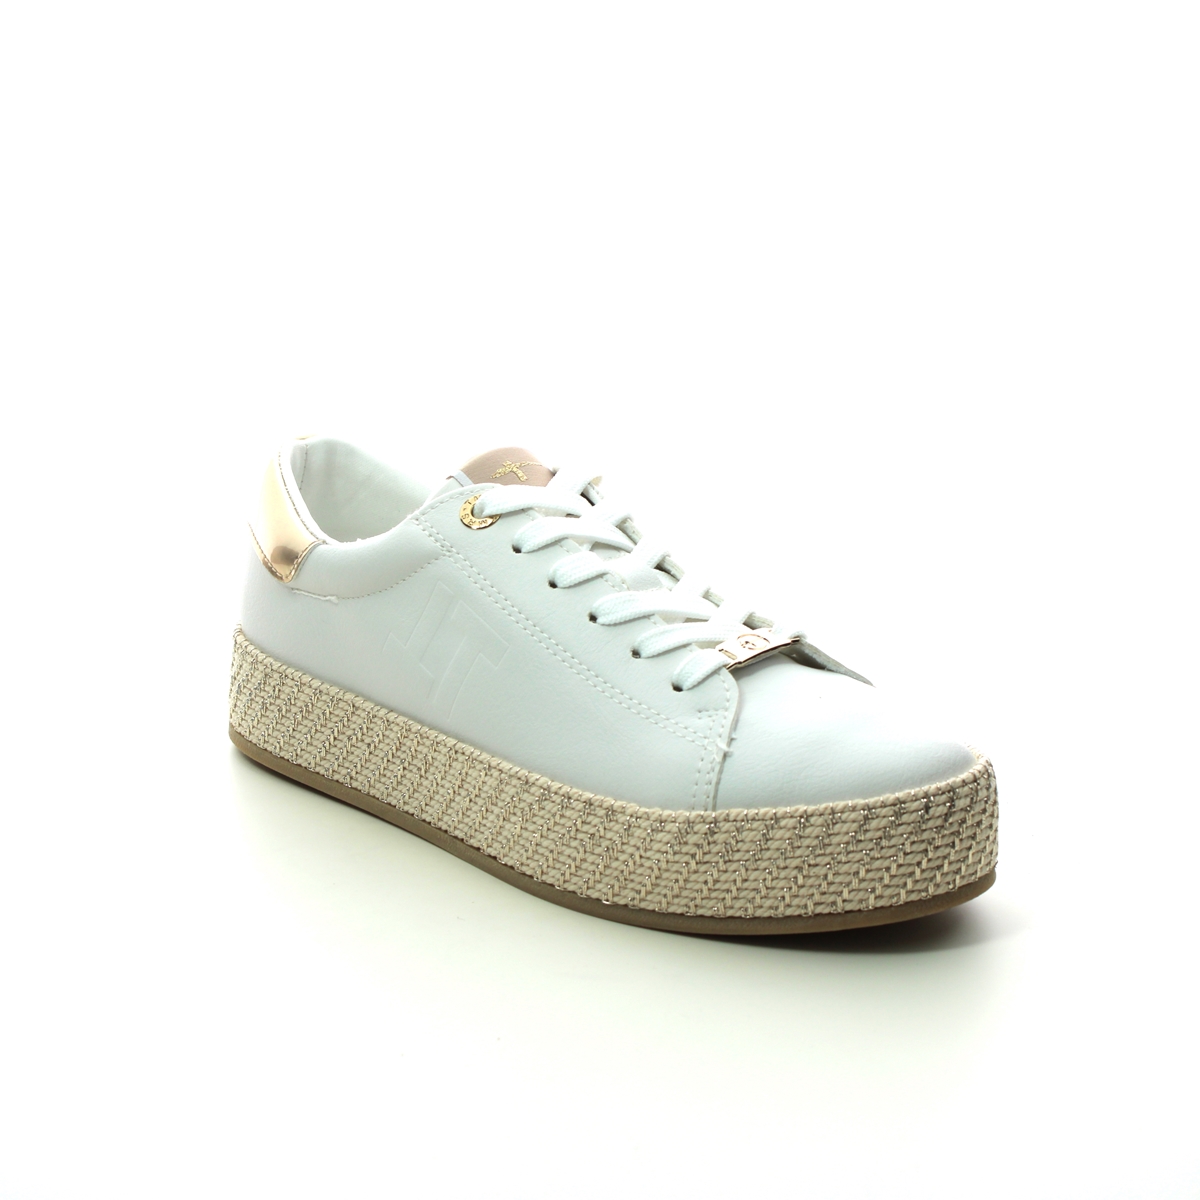 Tamaris Espadrille White Gold Womens Trainers 23713-20-190 In Size 36 In Plain White Gold